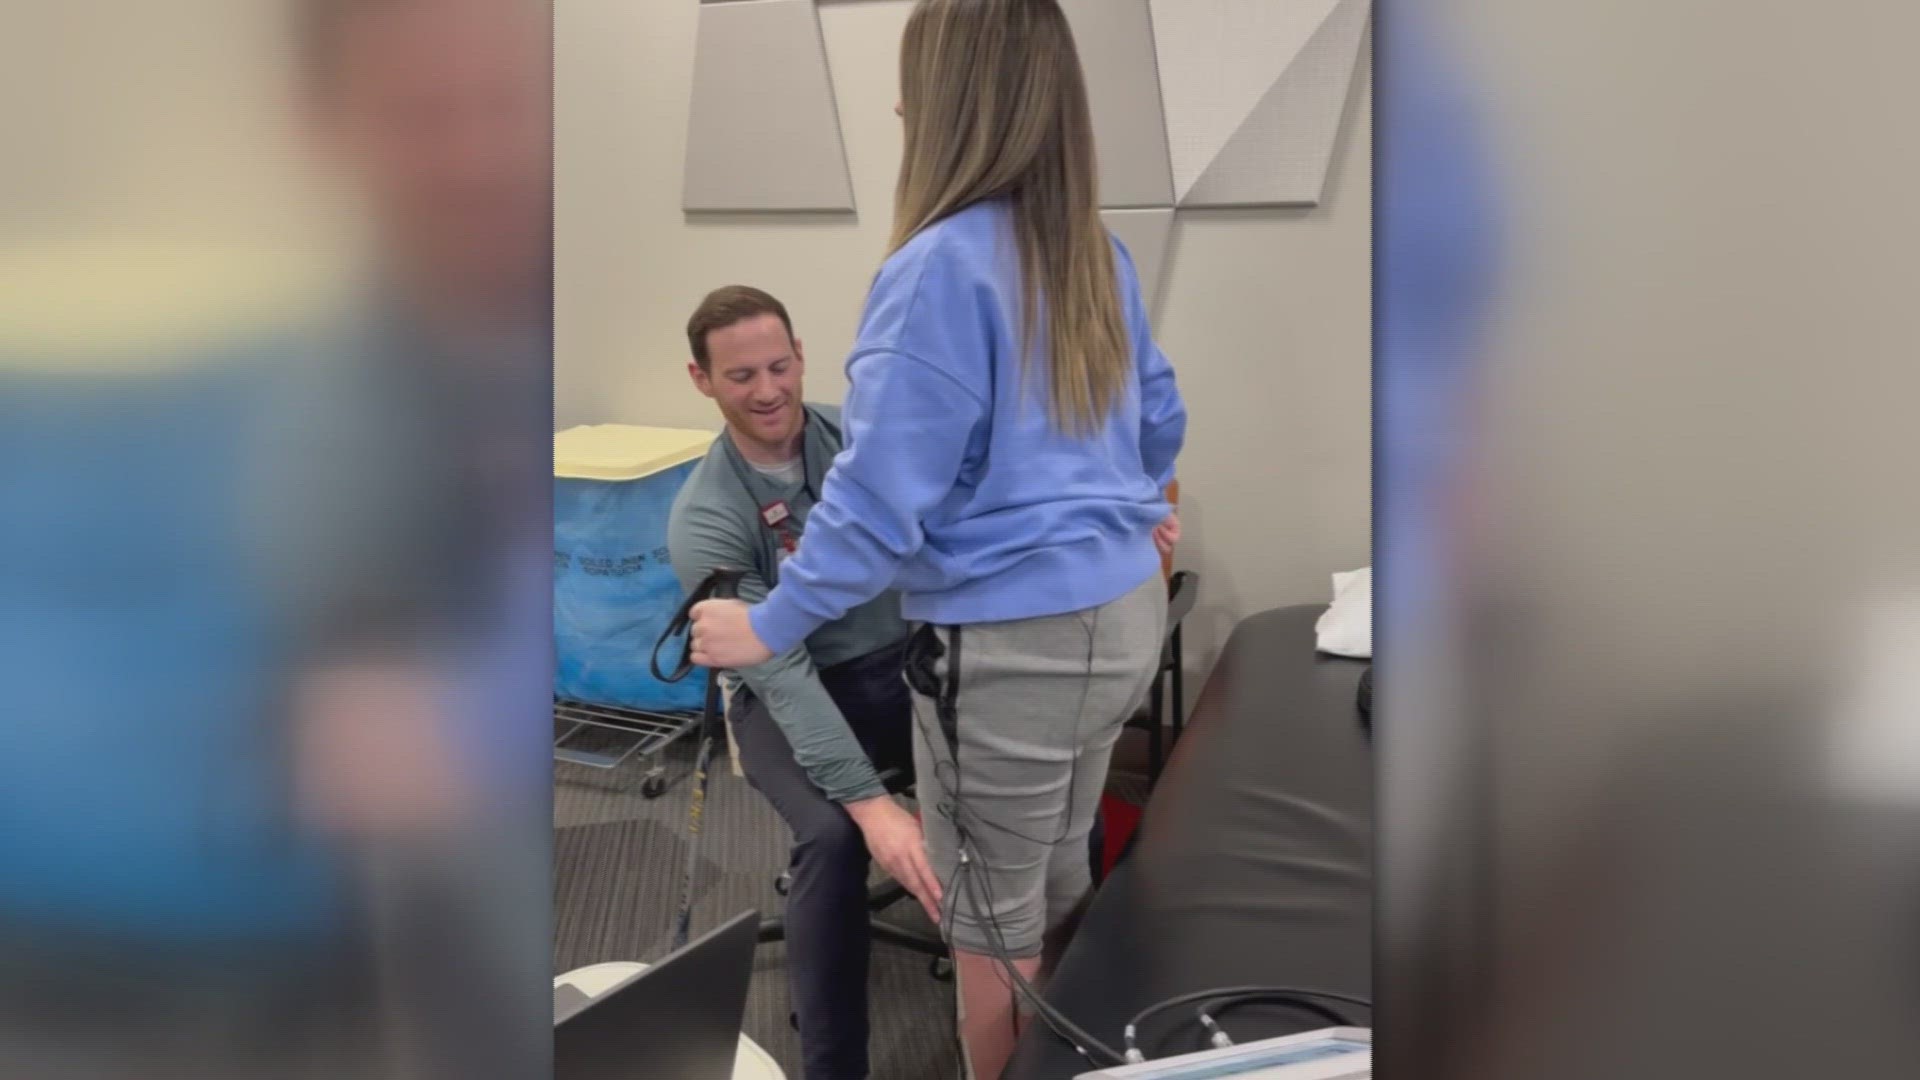 Leah Weiher became paralyzed from the waist down and doctors told her in November that they weren’t sure if she would ever walk again.